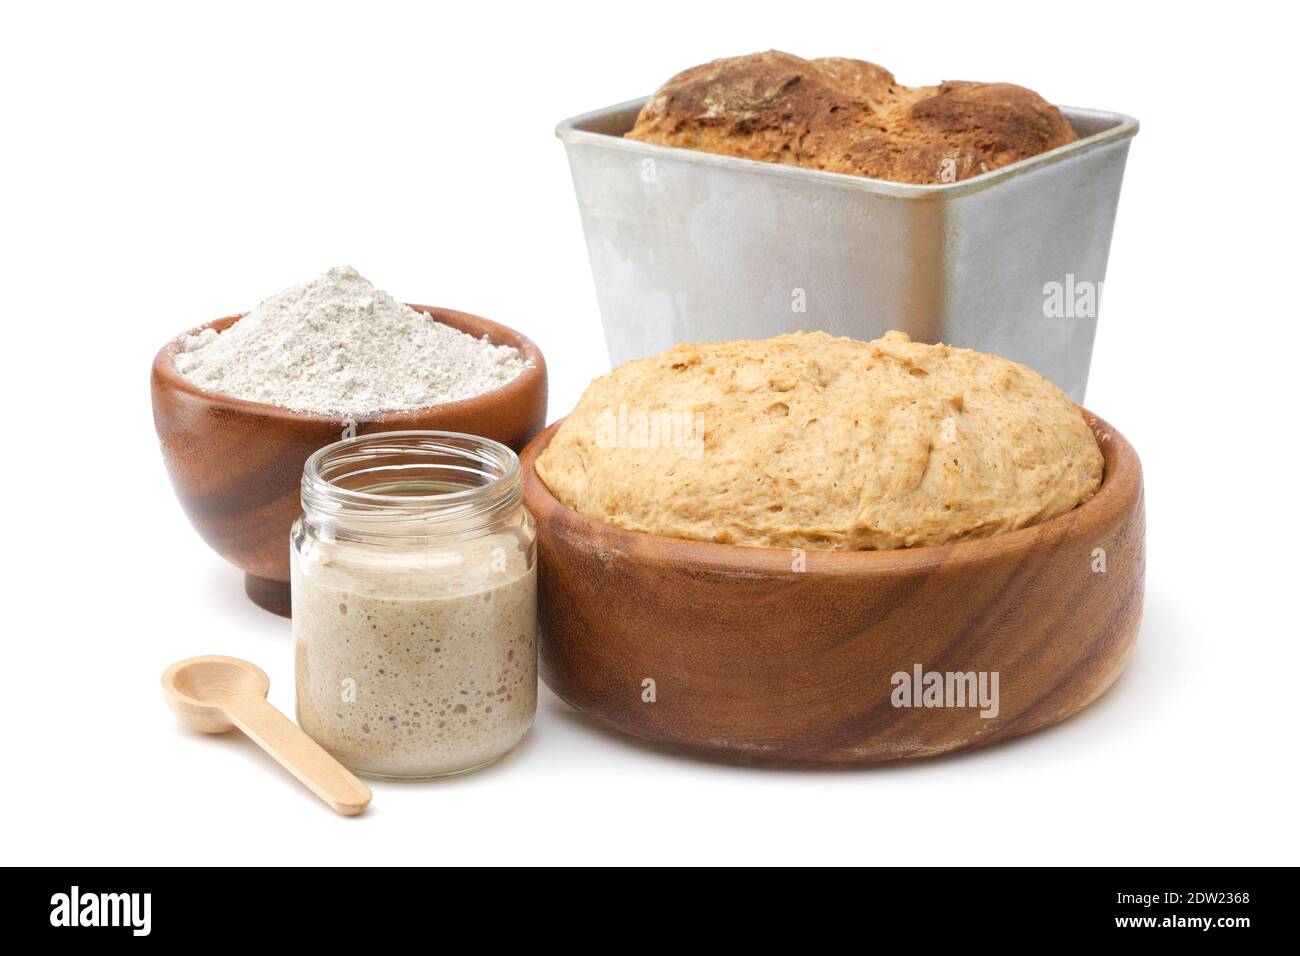 https://c8.alamy.com/comp/2DW2368/natural-leaven-for-bread-in-a-glass-jar-wooden-bowl-of-dough-bowl-of-flour-and-freshly-baked-loaf-in-baking-tin-on-white-2DW2368.jpg